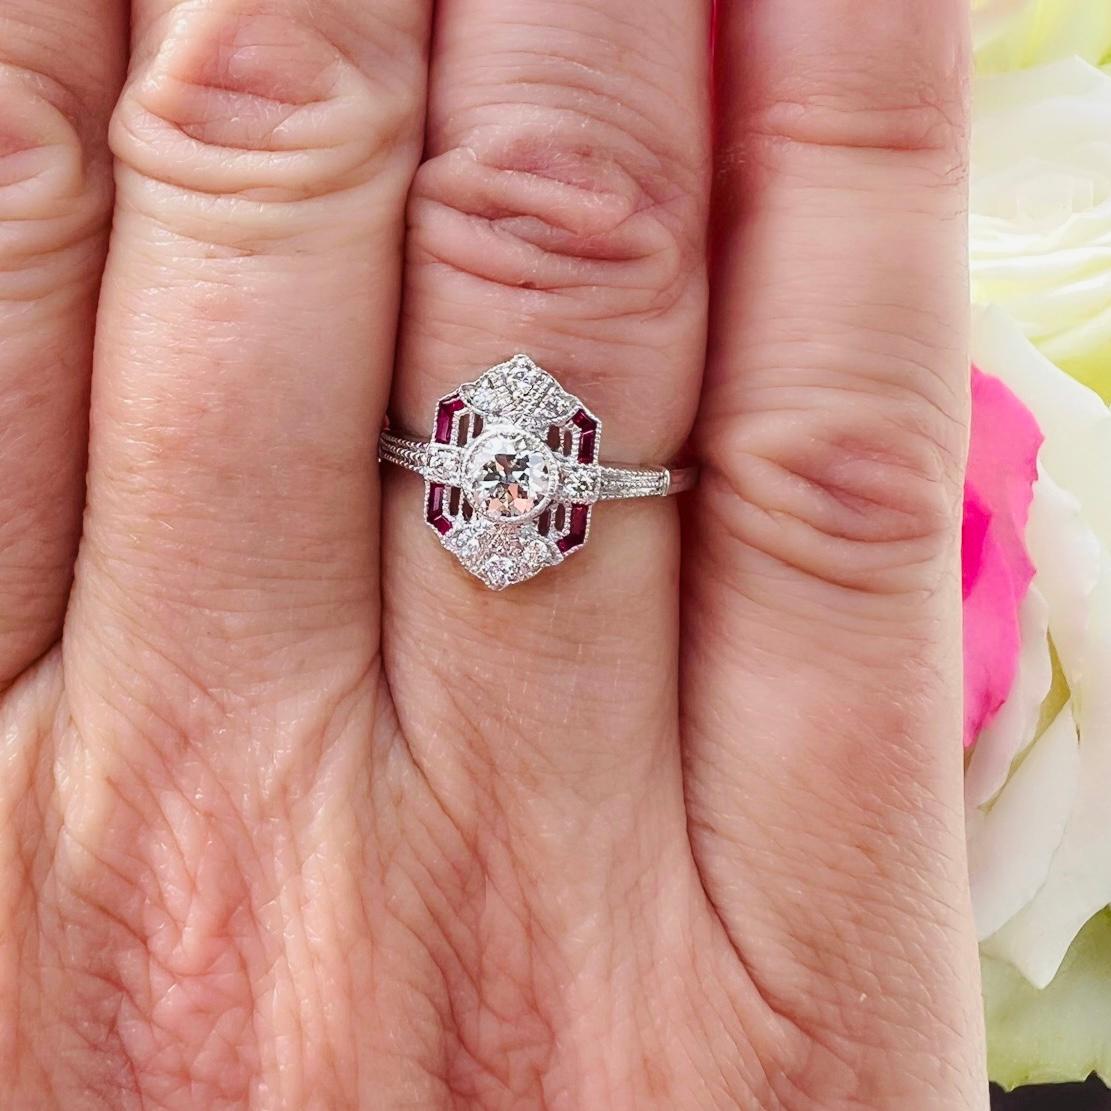 Design reminiscent of an era where design really mattered! This Art Deco inspired white gold stunner features a 0.42 carat Old European Cut Diamond at the center, bezel set amidst fine white melee diamonds and expertly cut rubies, forming a gorgeous